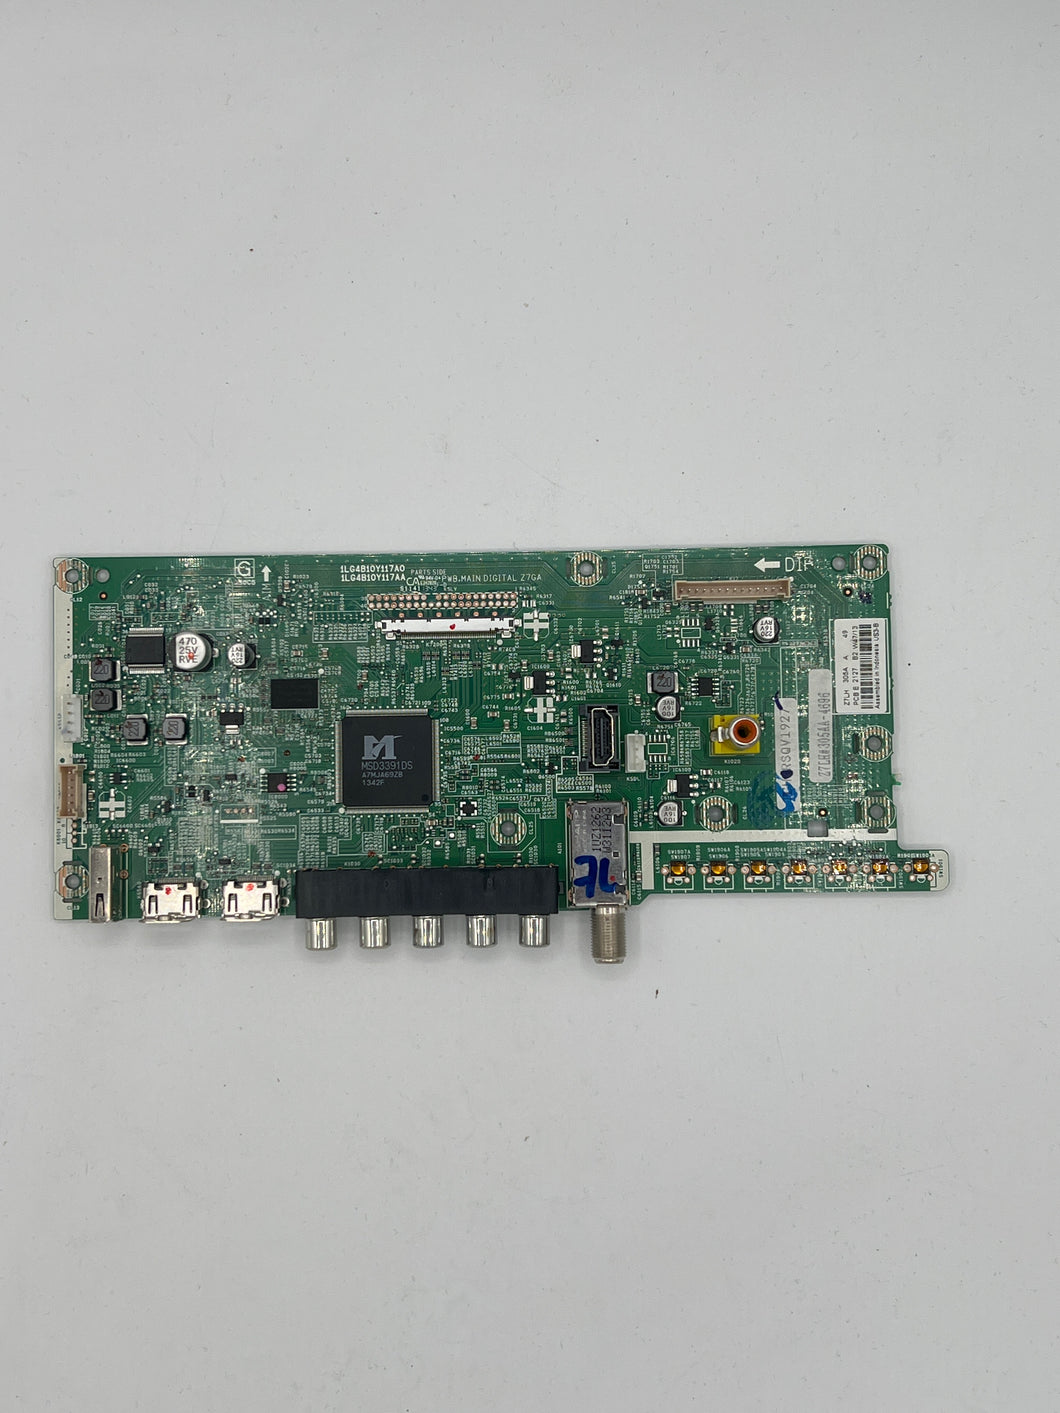 1LG4B10Y117A0 Z7LH MAINBOARD FOR A SANYO TV(DP42D23)